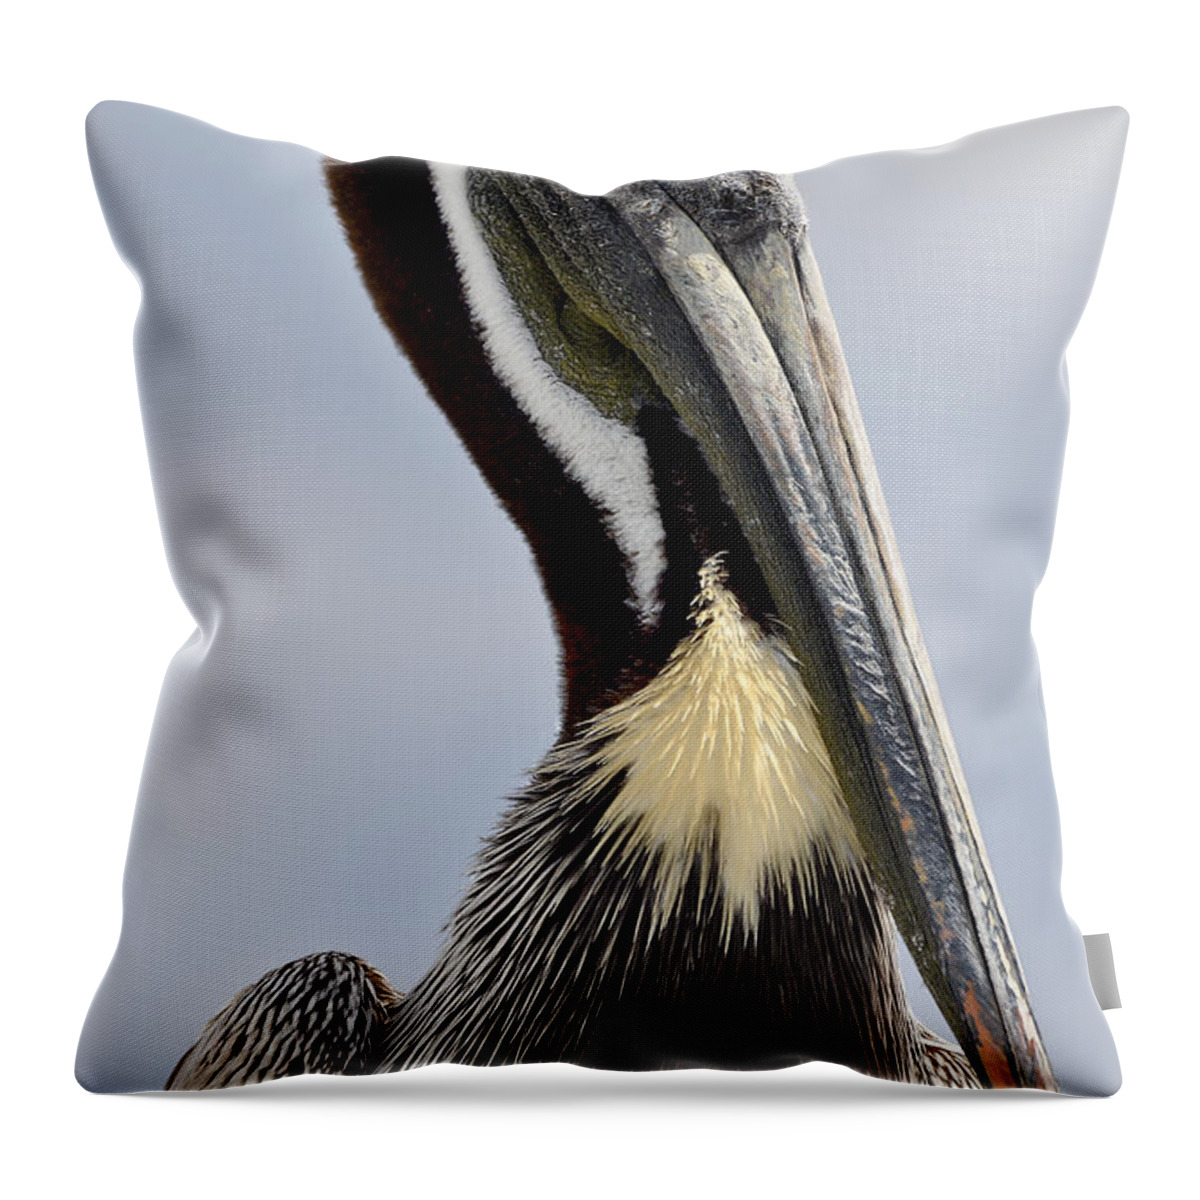 Original Throw Pillow featuring the photograph The Majestic Pelican by WAZgriffin Digital